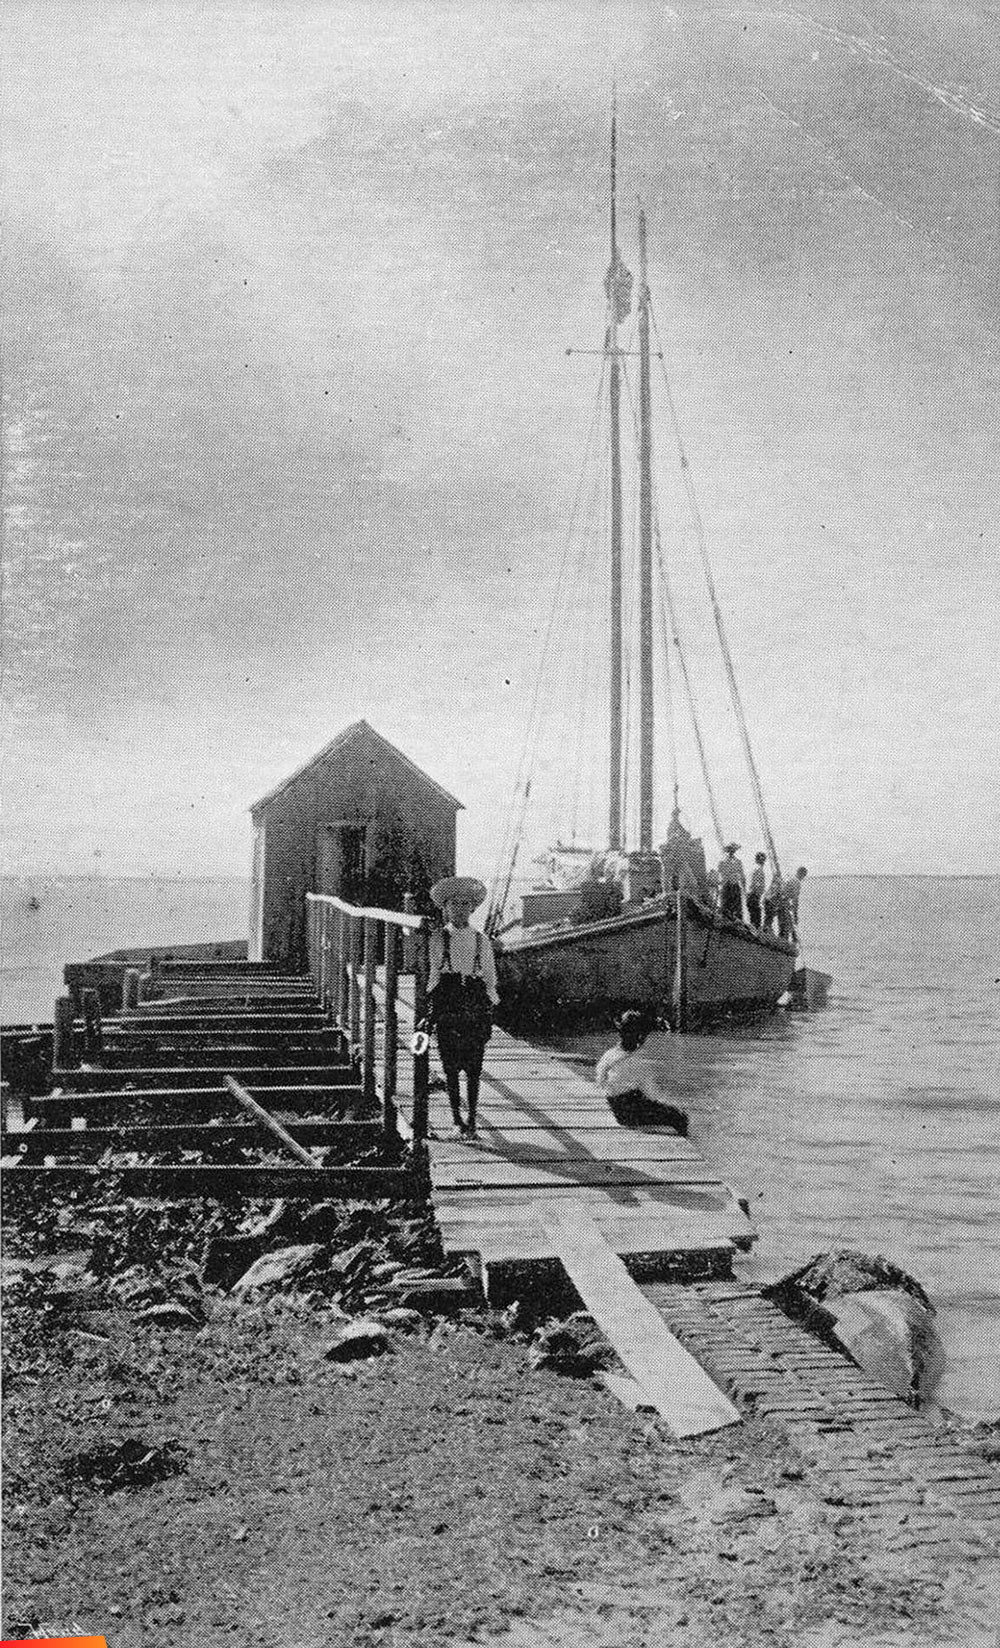 Scene on the coast of British Honduras, several folks and their boat alongside a pier, long ago